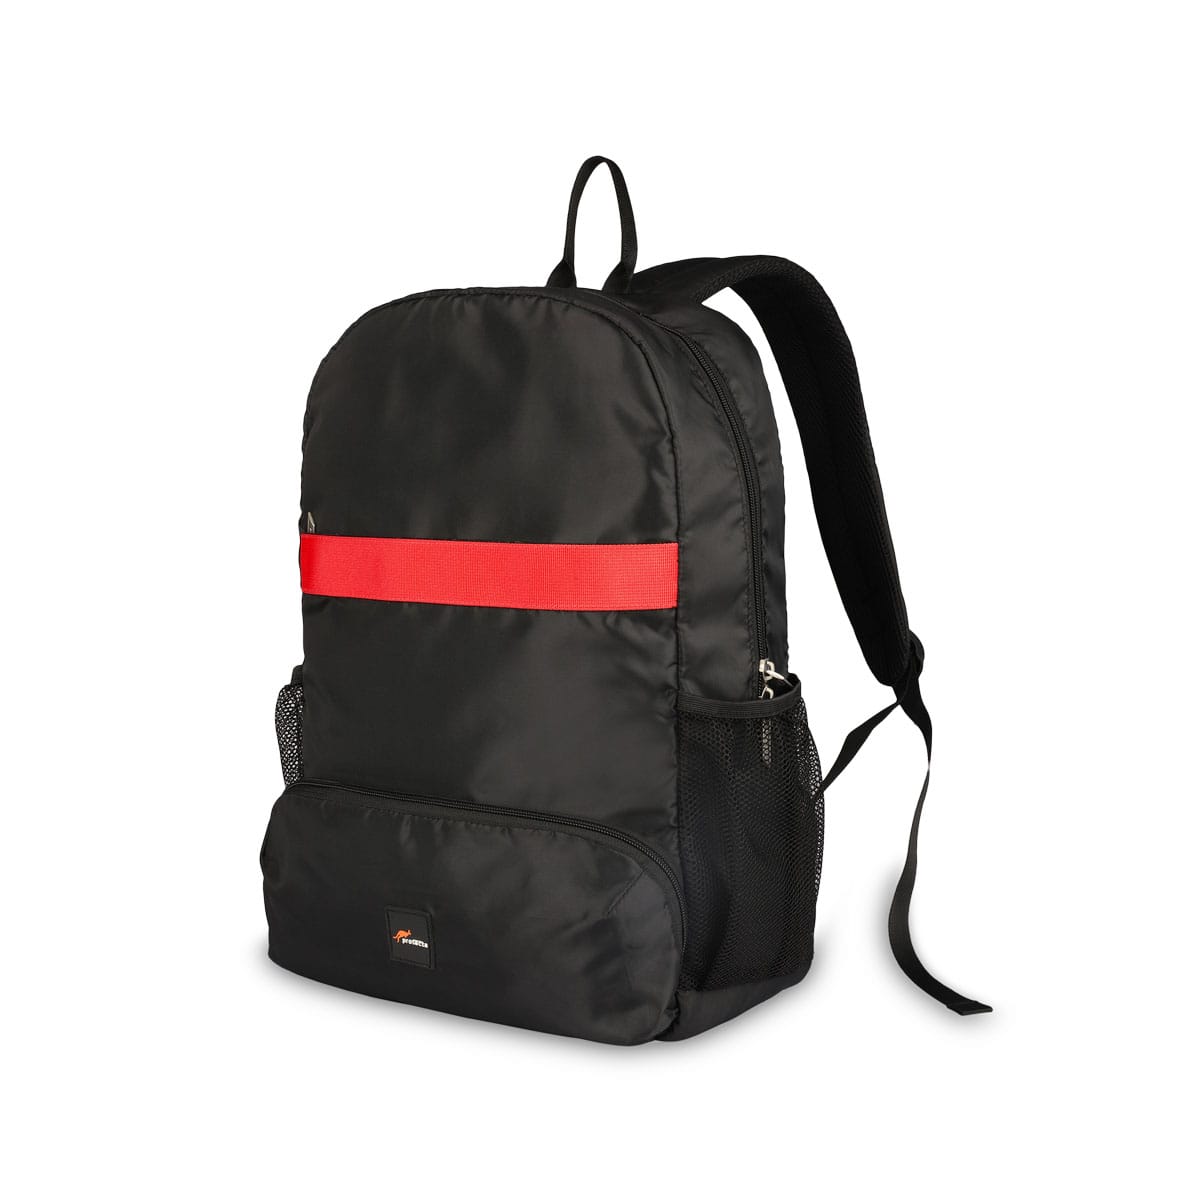 Black-Red | Protecta Triumph Laptop Backpack-1